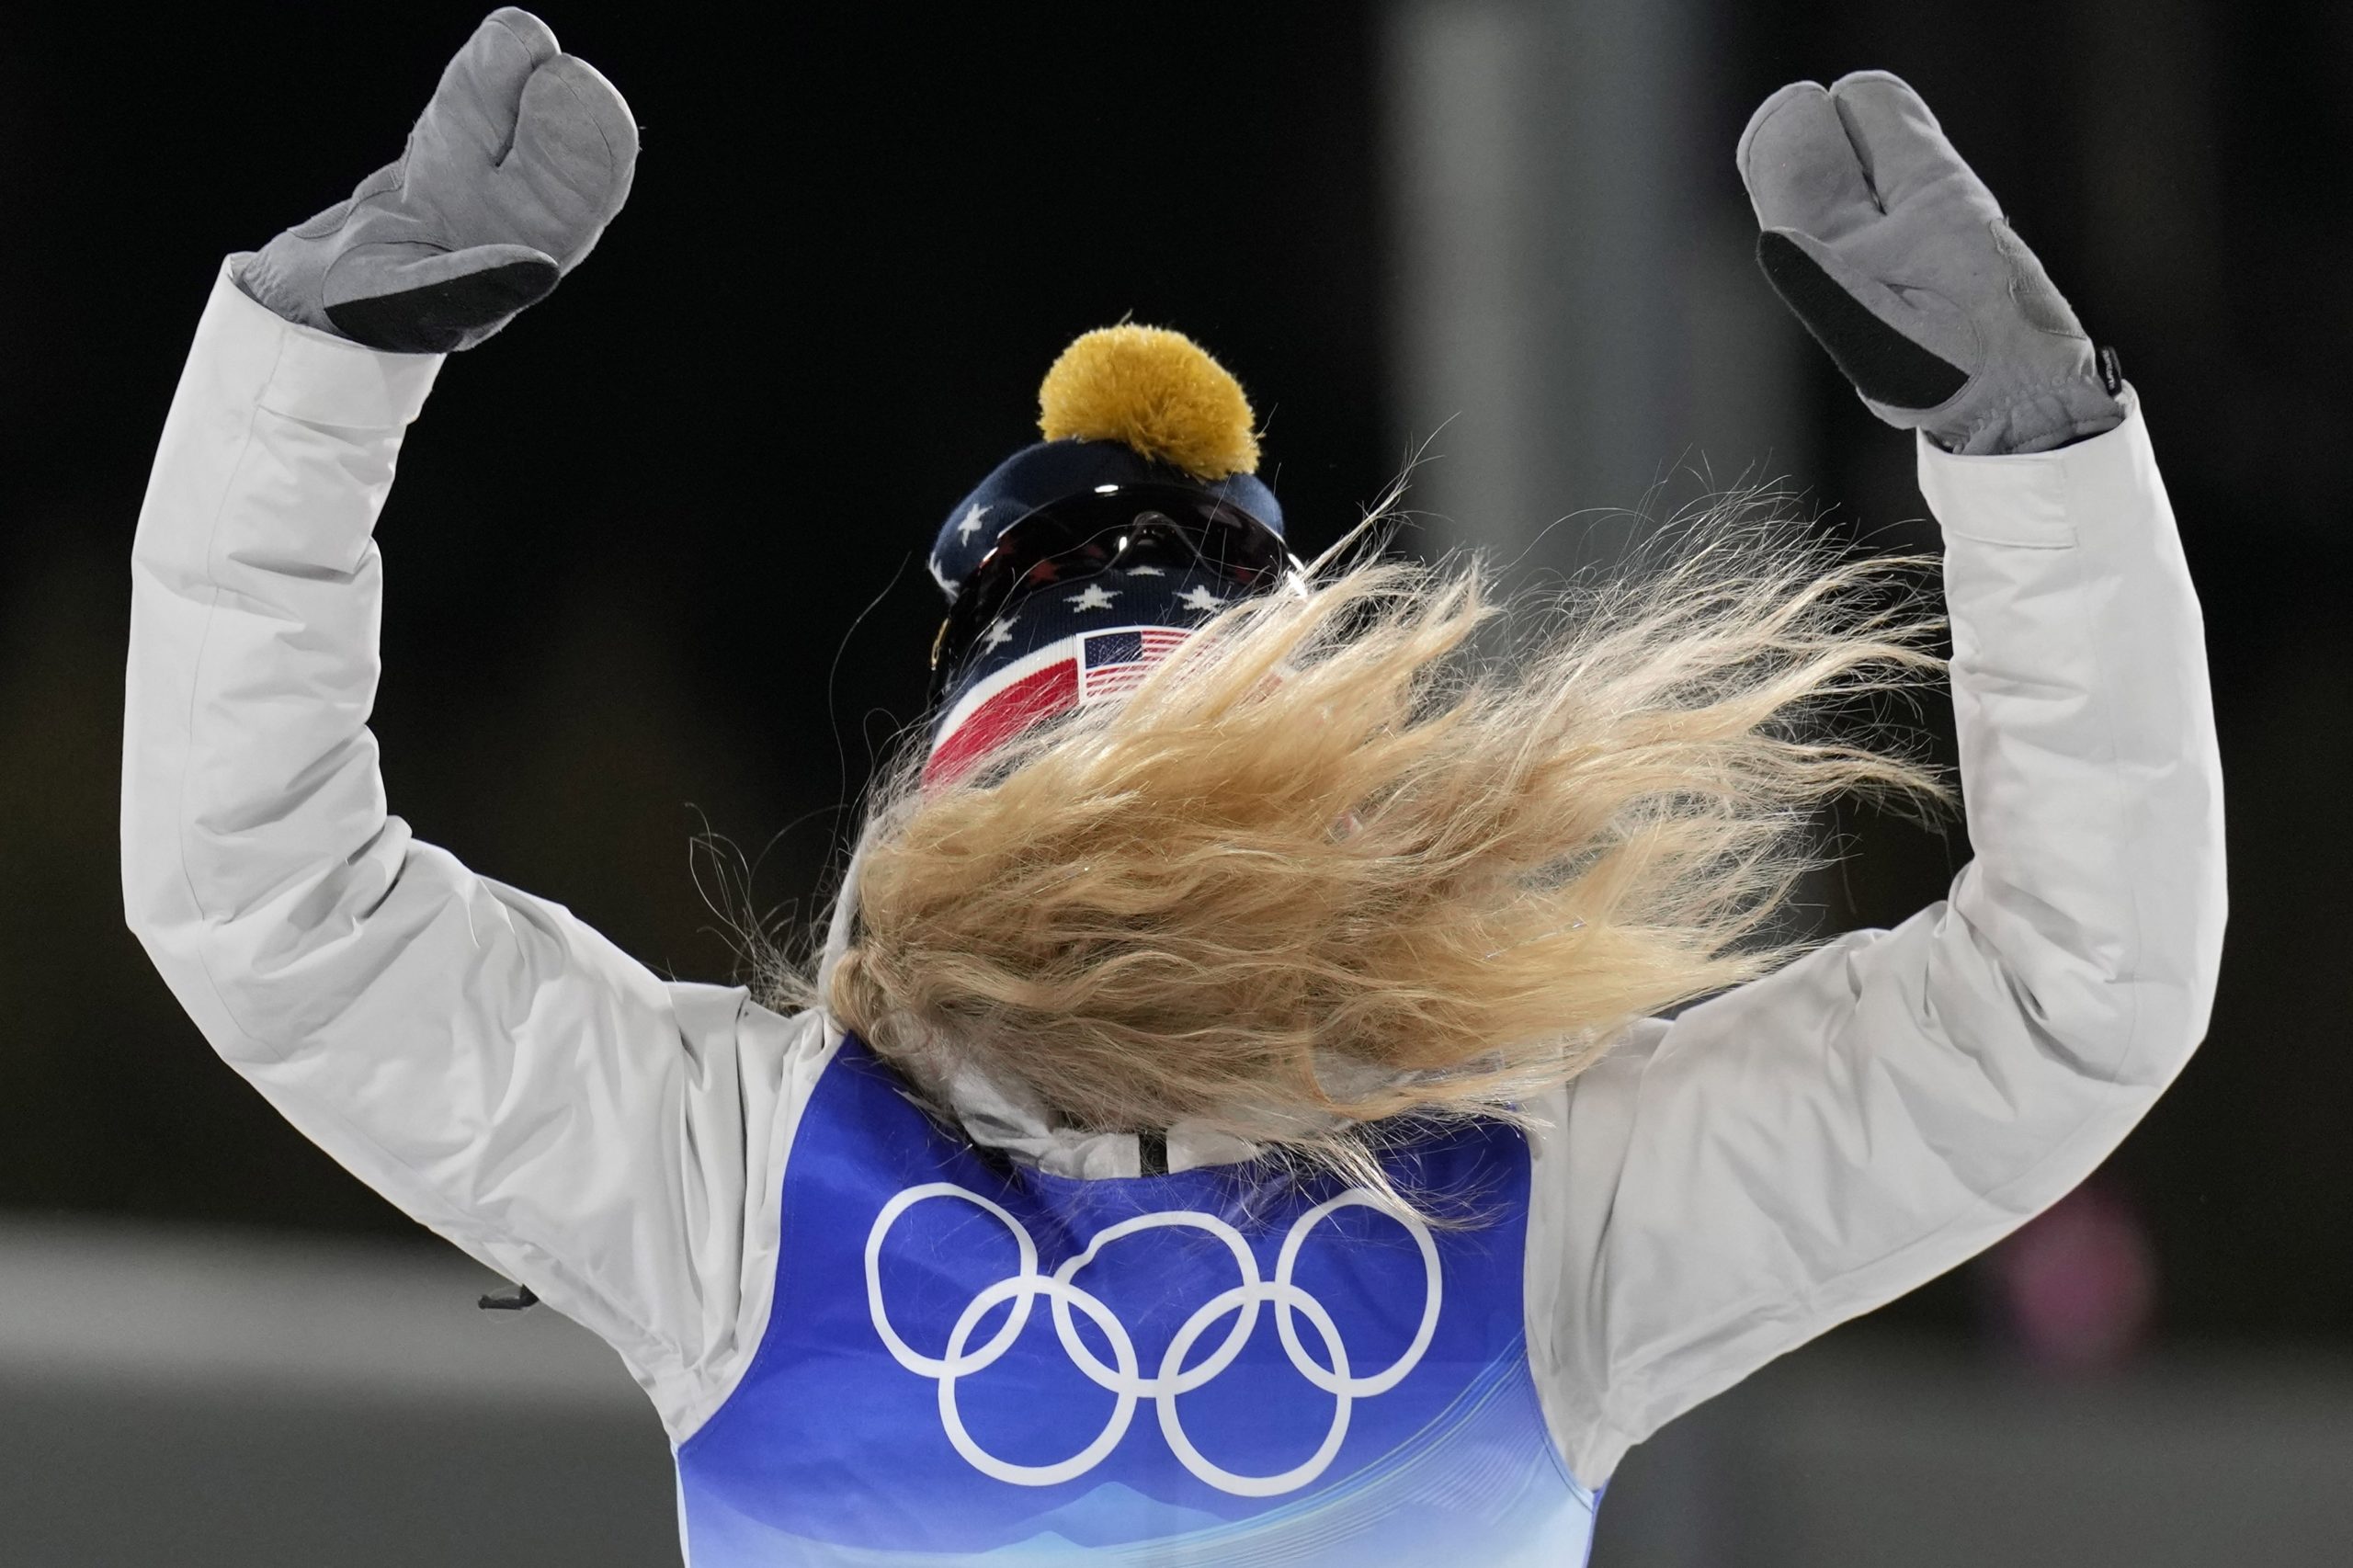 Jessie Diggins celebrates during a venue ceremony after winning the bronze medal in the women's sprint free cross-country skiing competition at the 2022 Winter Olympics, Tuesday, Feb. 8, 2022, in Zhangjiakou, China. (AP Photo/Alessandra Tarantino)